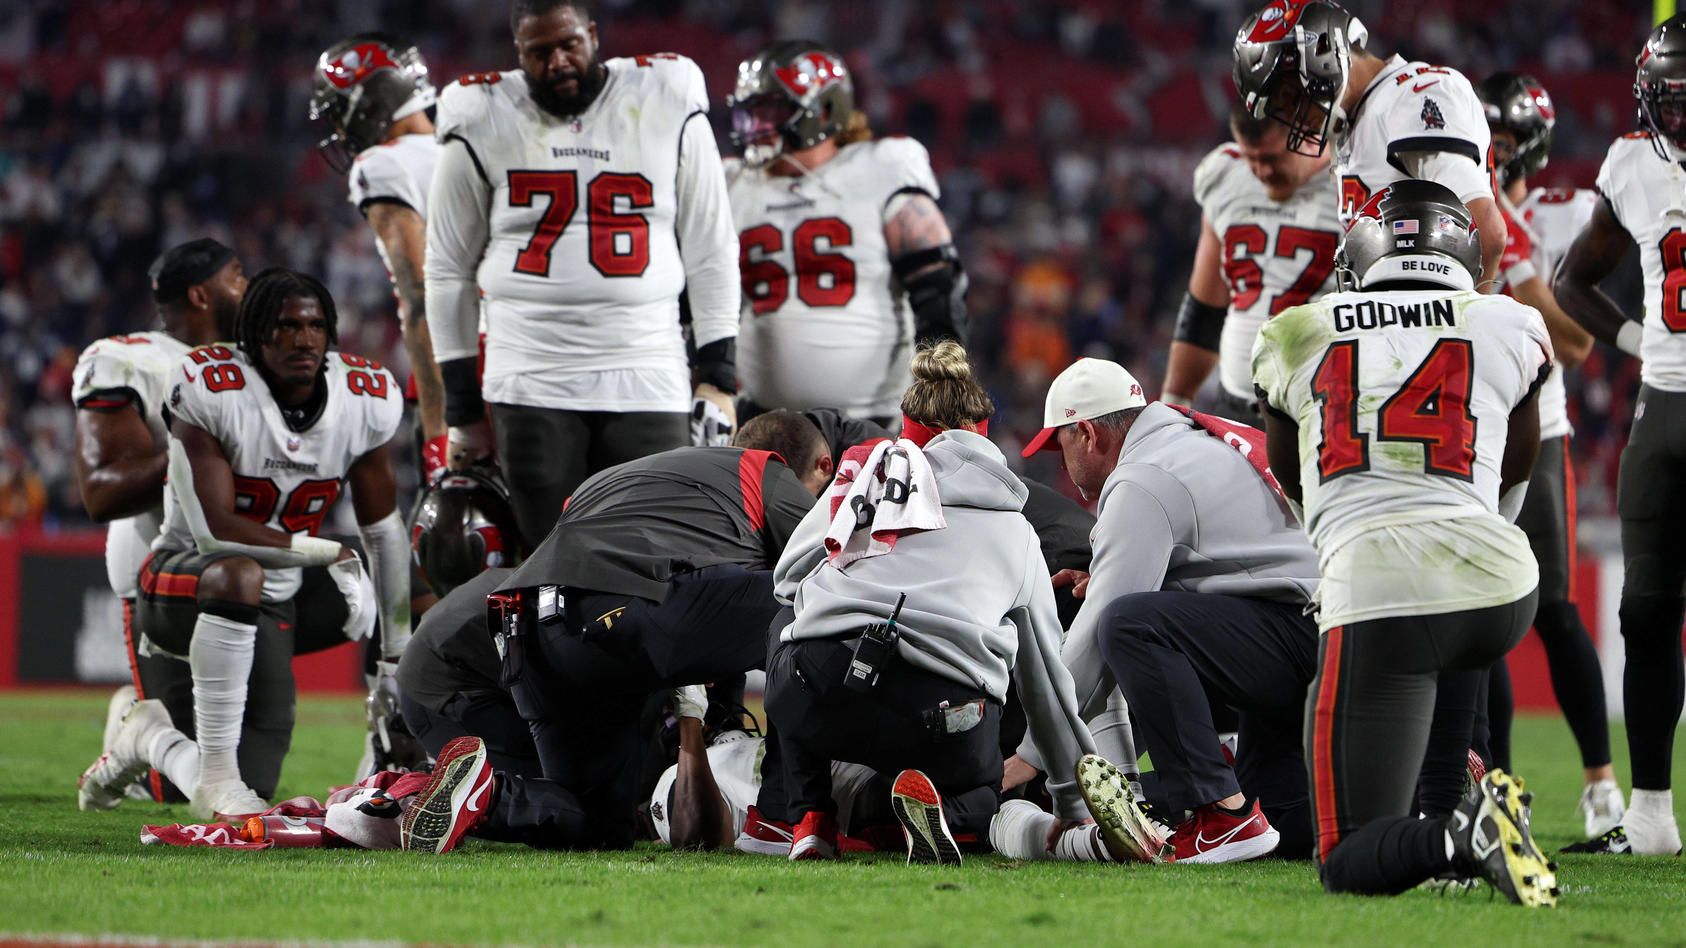 NFL, American Football Herren, USA NFC Wild Card Round-Dallas Cowboys at Tampa Bay Buccaneers Jan 16, 2023 Tampa, Florida, USA Tampa Bay Buccaneers wide receiver Russell Gage 17 lays on the field as medical personal render aid during a wild card game